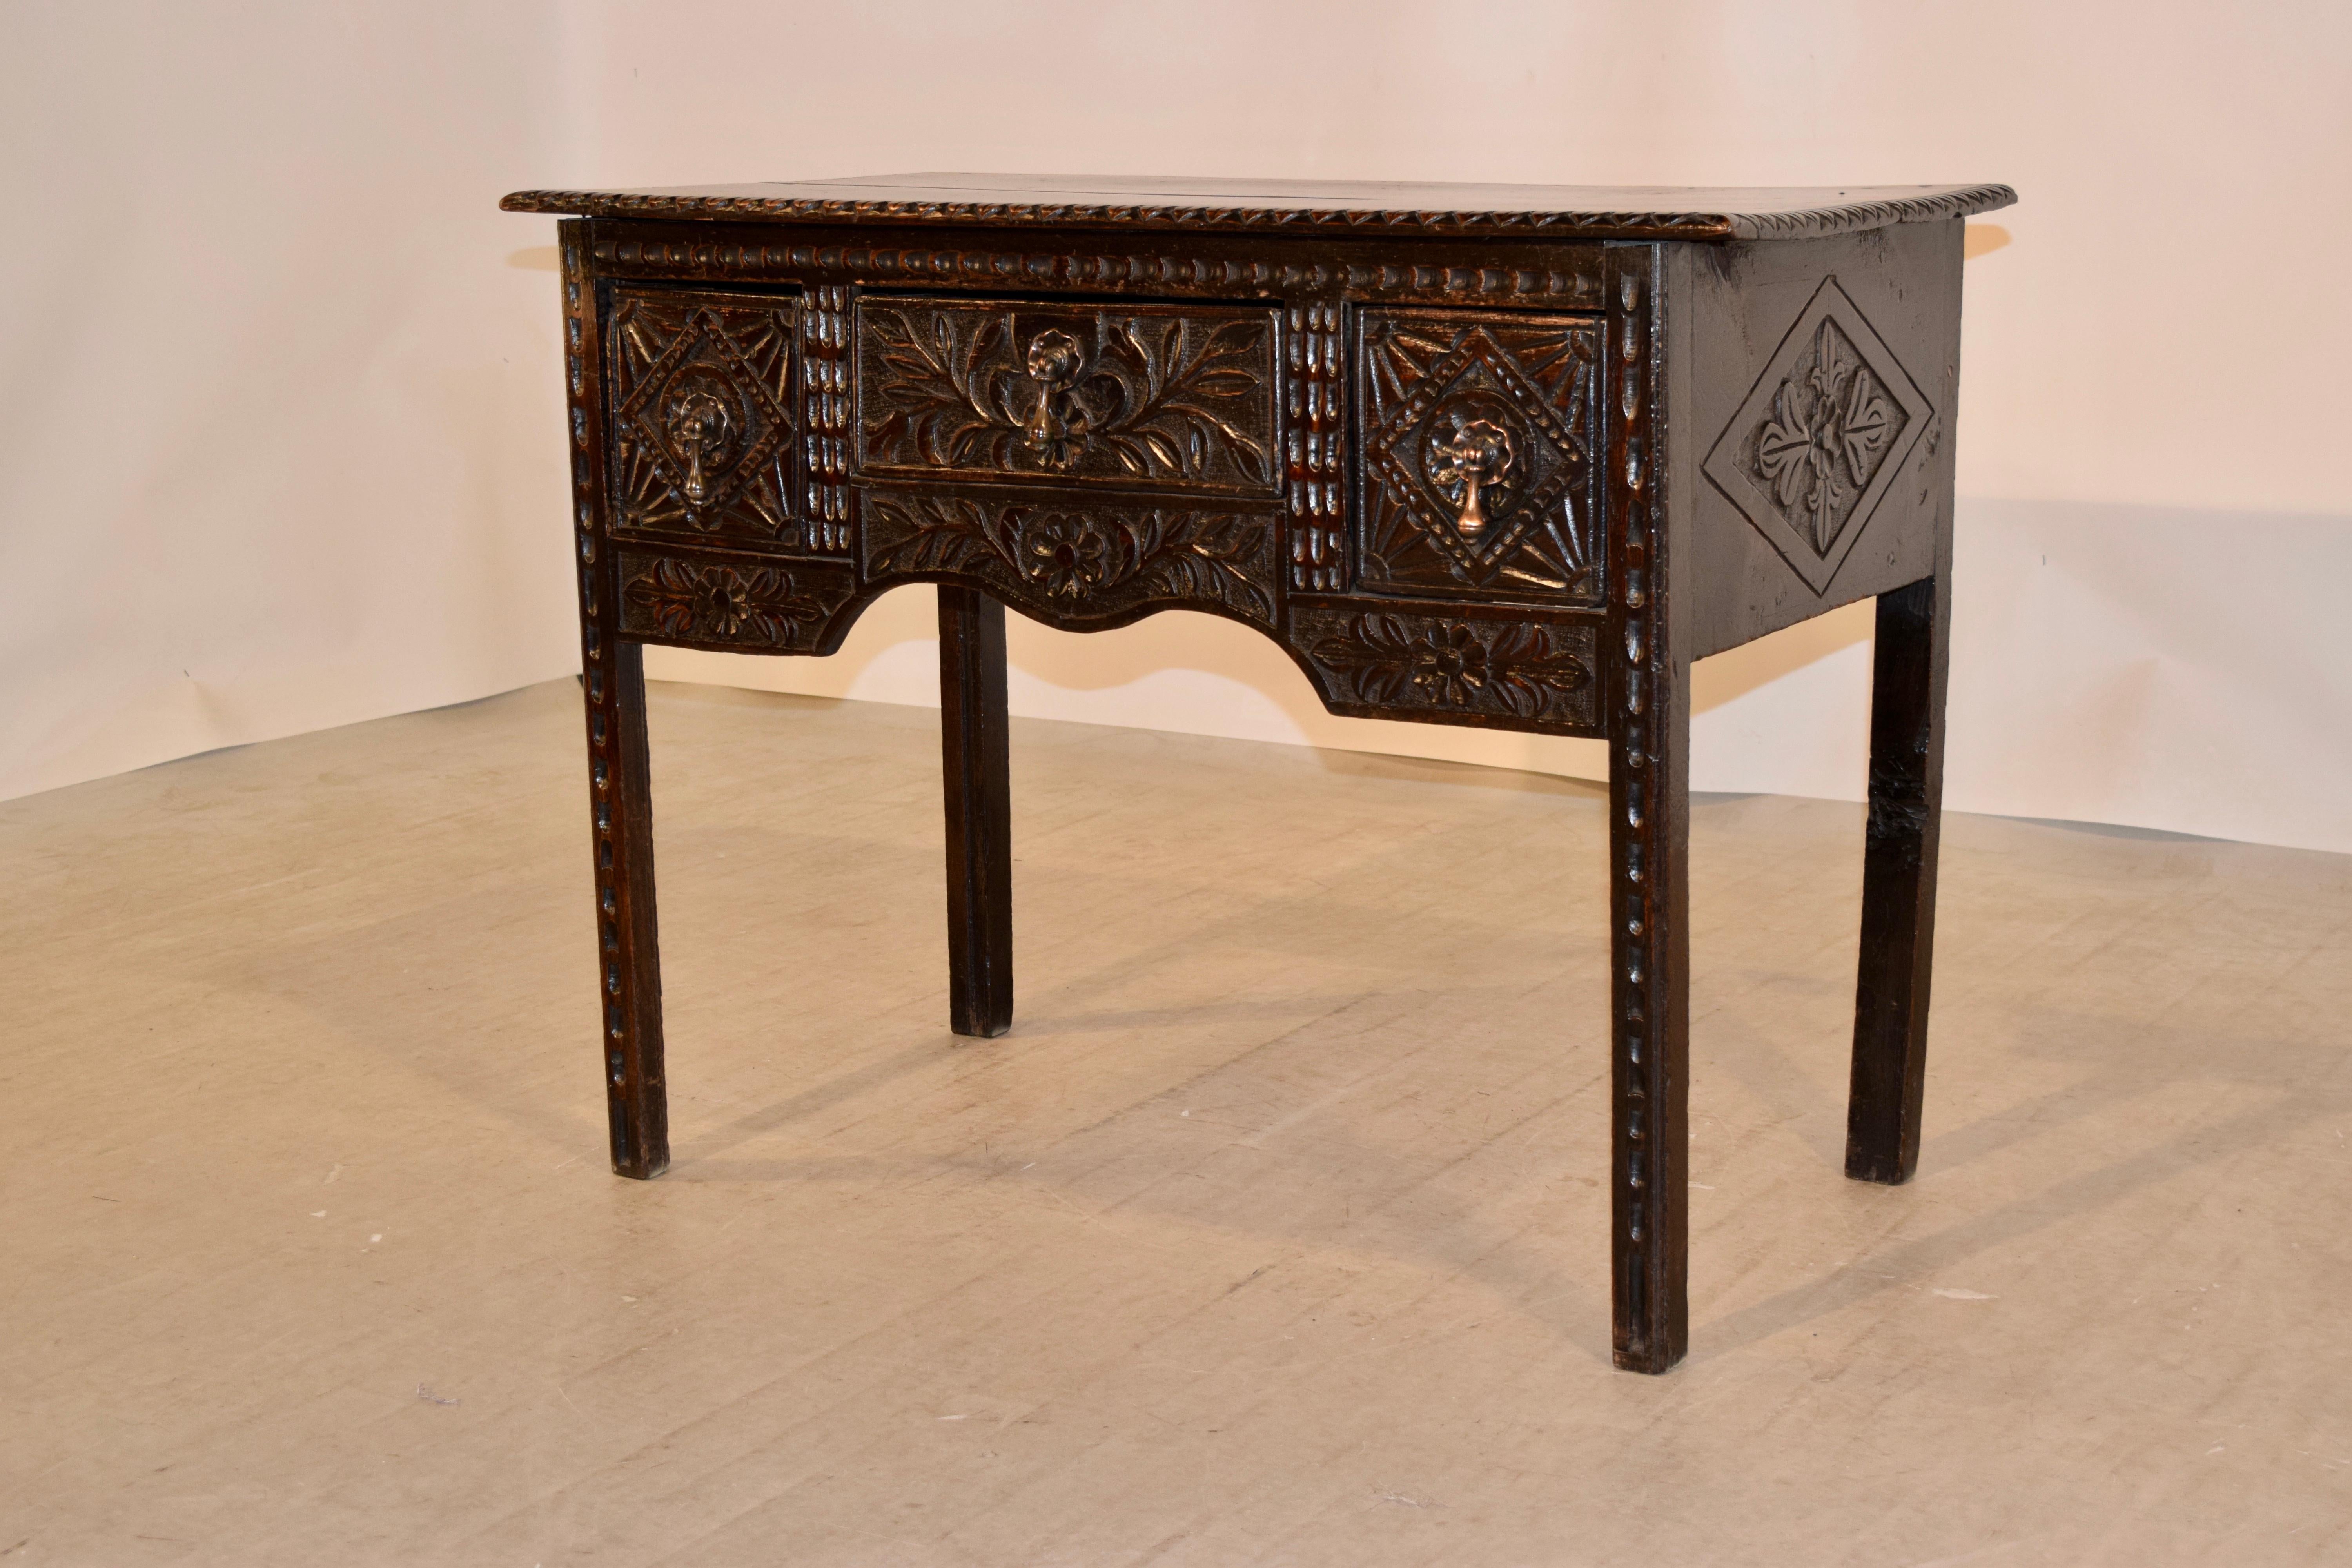 18th century oak lowboy from England with a two plank top which also has a beveled and carved decorated edge. This follows down to simple sides with carved medallion decorations and three drawers in the front, all with exquisitely hand carved